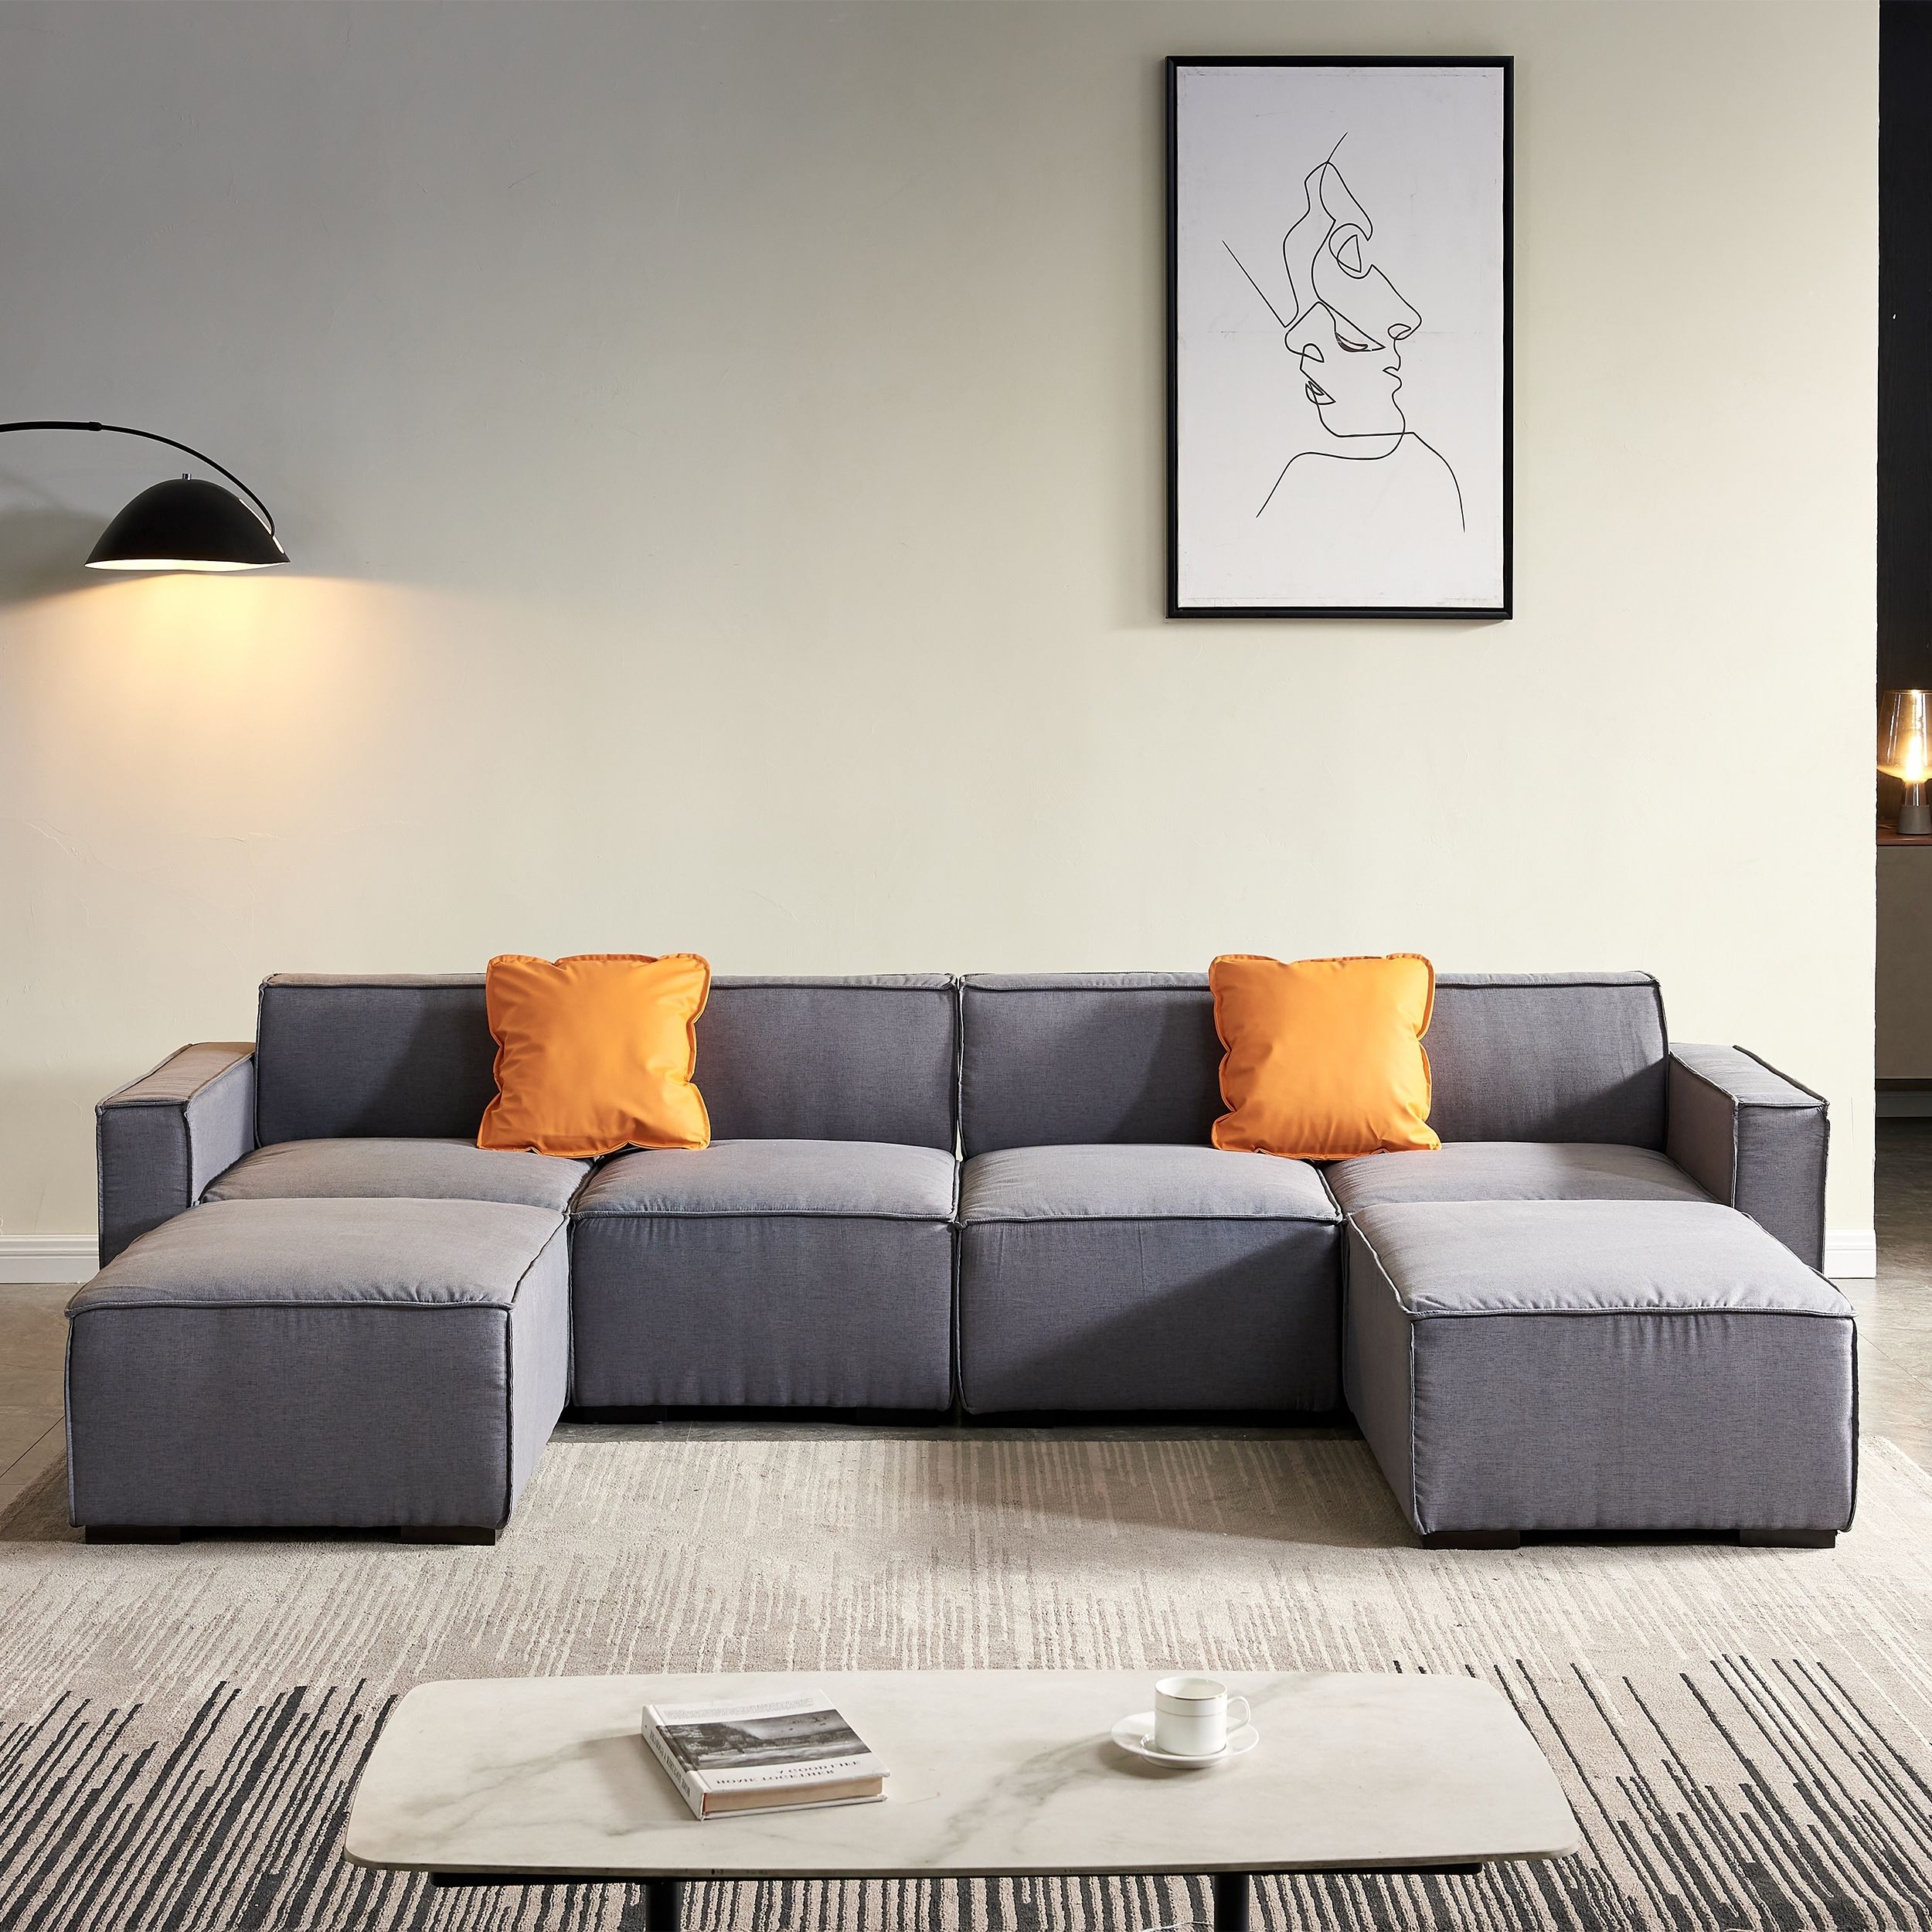 6 Seat Sectional Sofa Set Livingroom Modular Couch With 2 Ottoman&2 Pillows  – On Sale – – 36933437 With Regard To 6 Seater Modular Sectional Sofas (View 13 of 20)